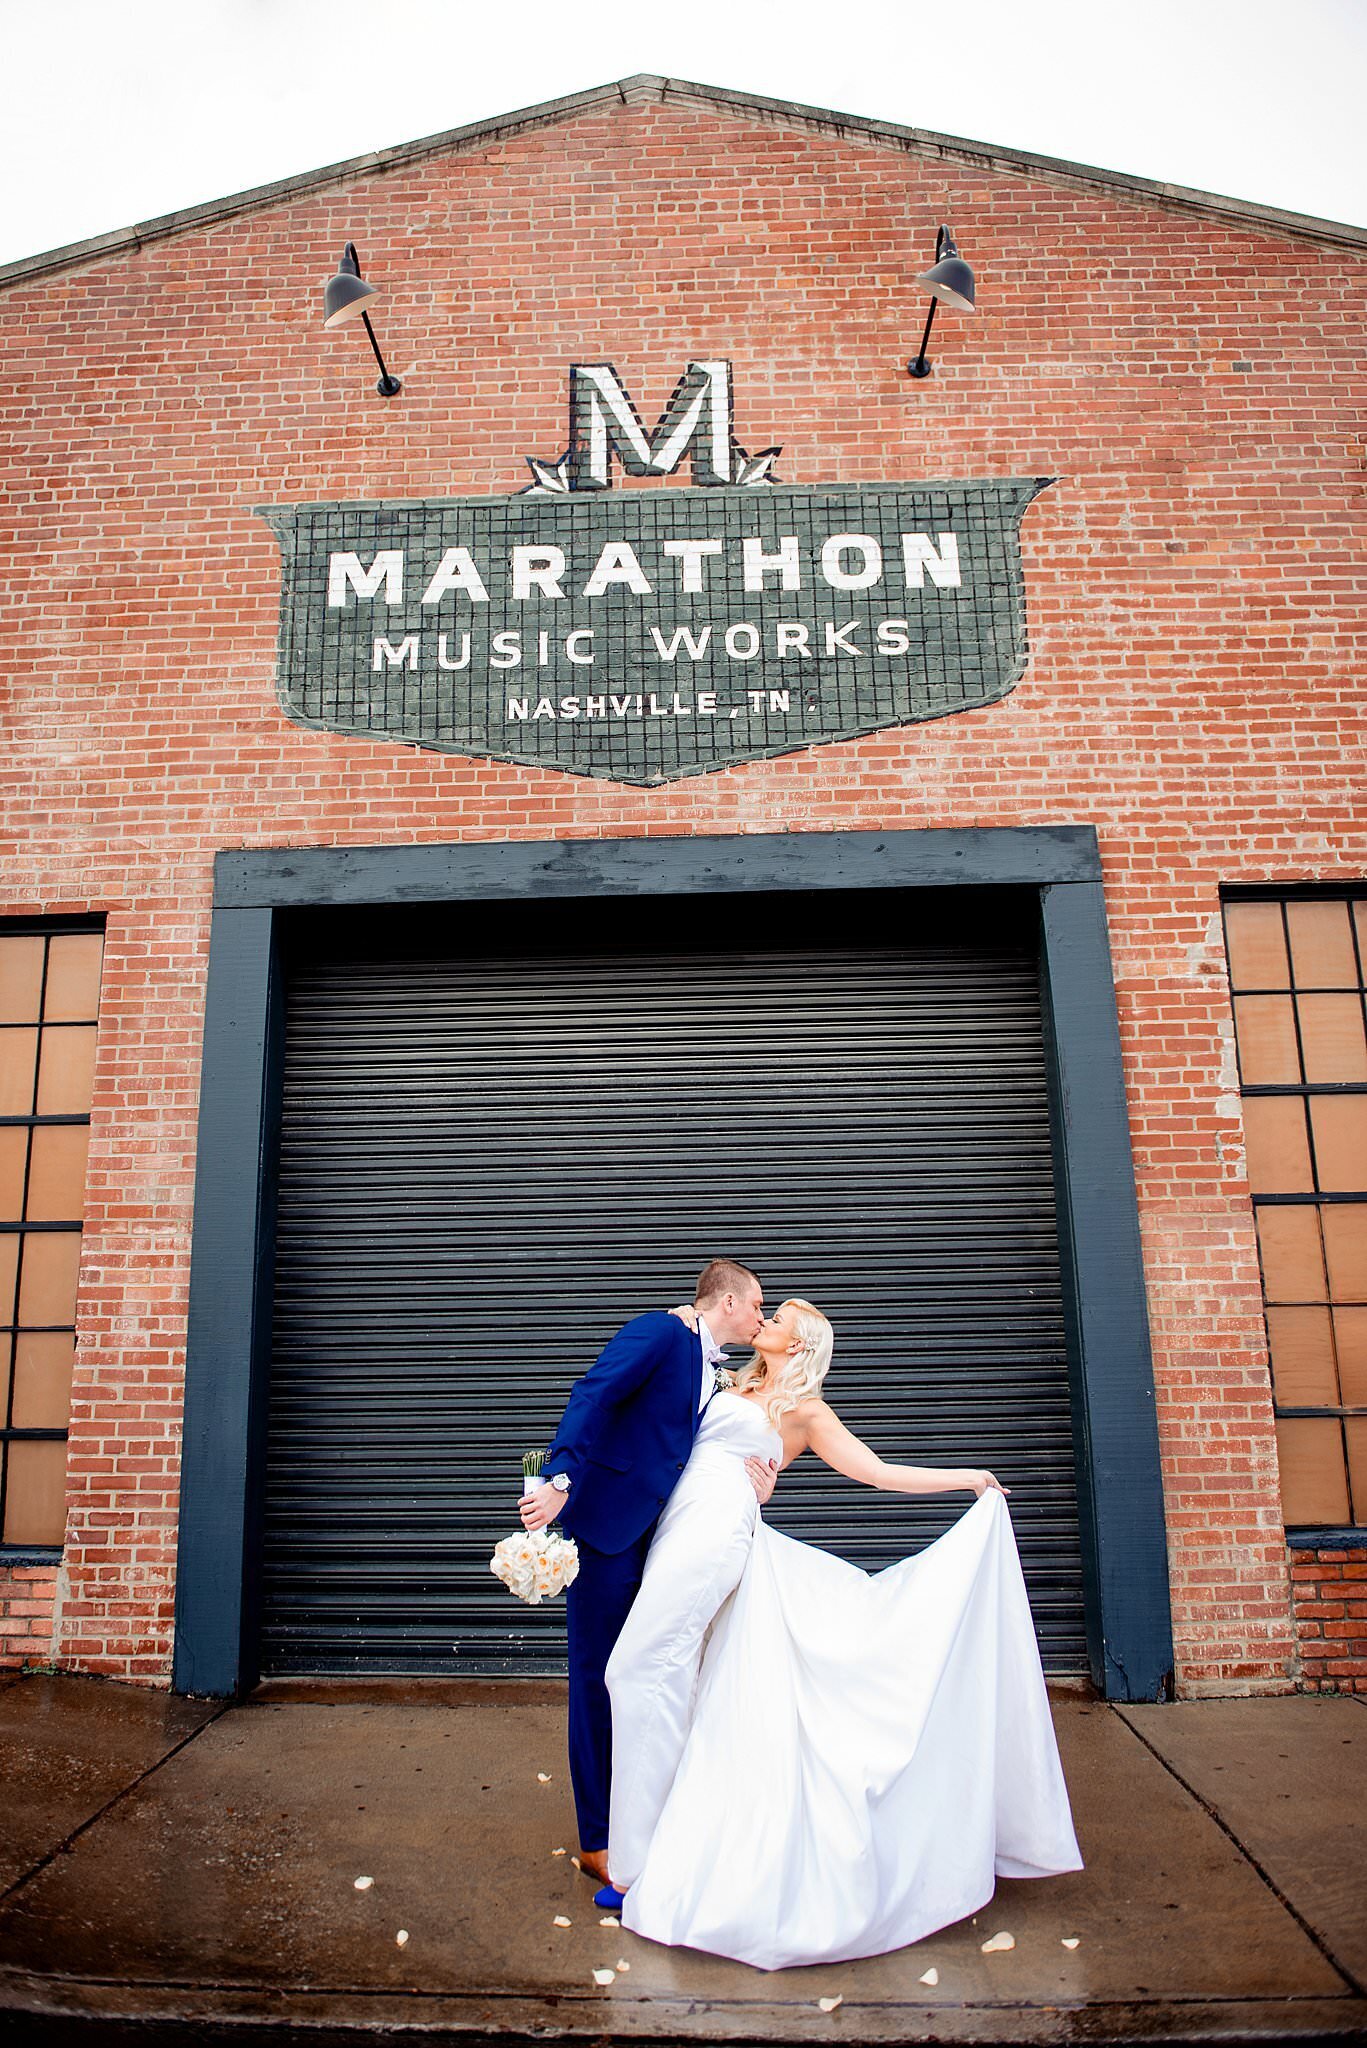 Bride and groom kissing under the Marathon Music Works mural on the brick building